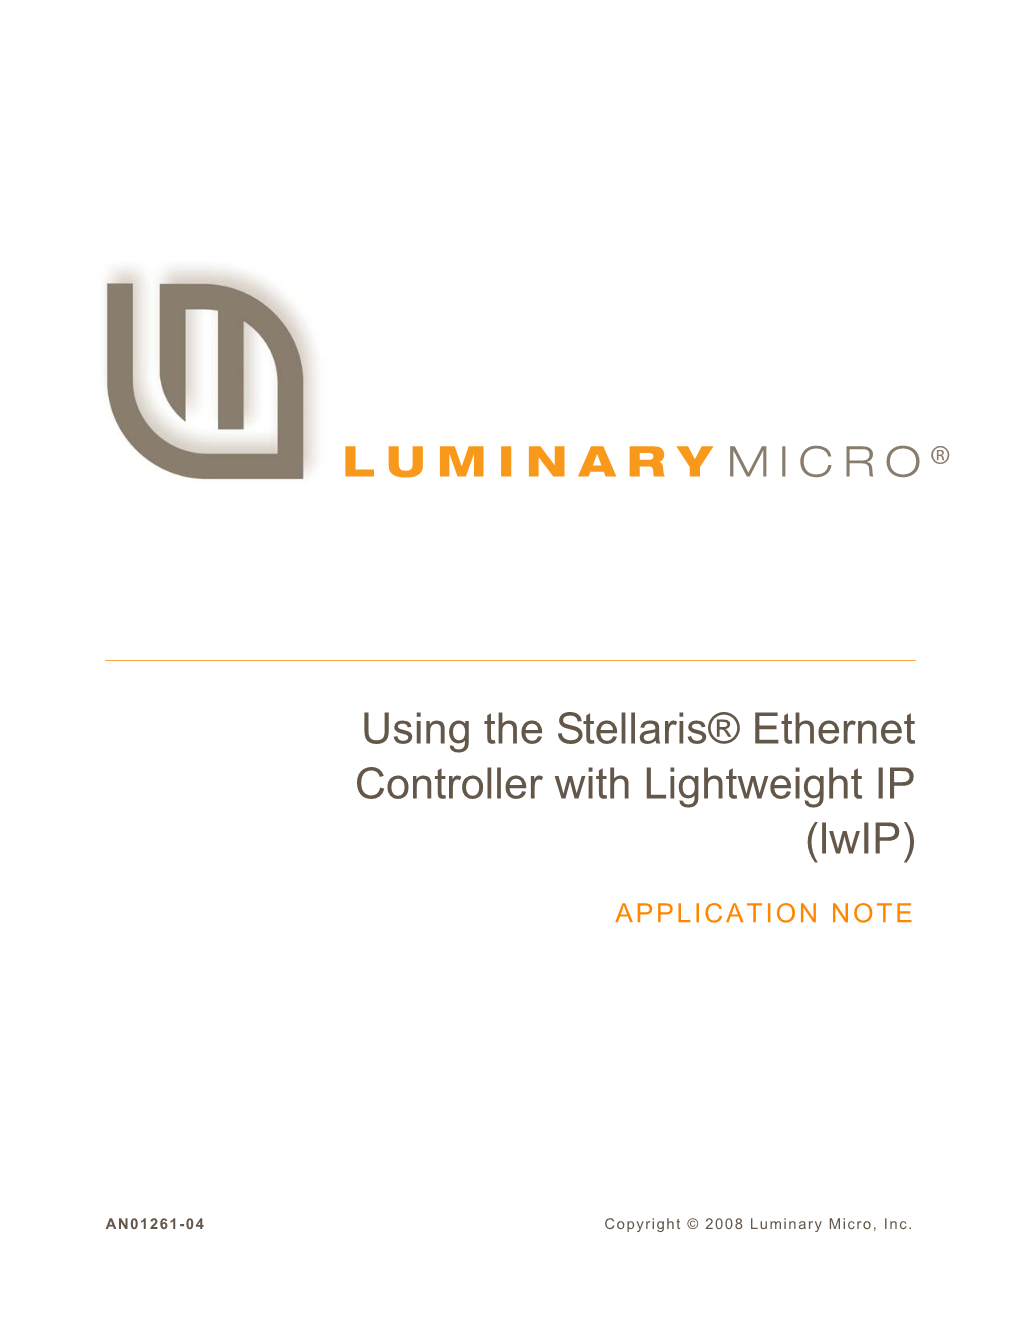 Using the Stellaris Ethernet Controller with Lightweight IP (Lwip)